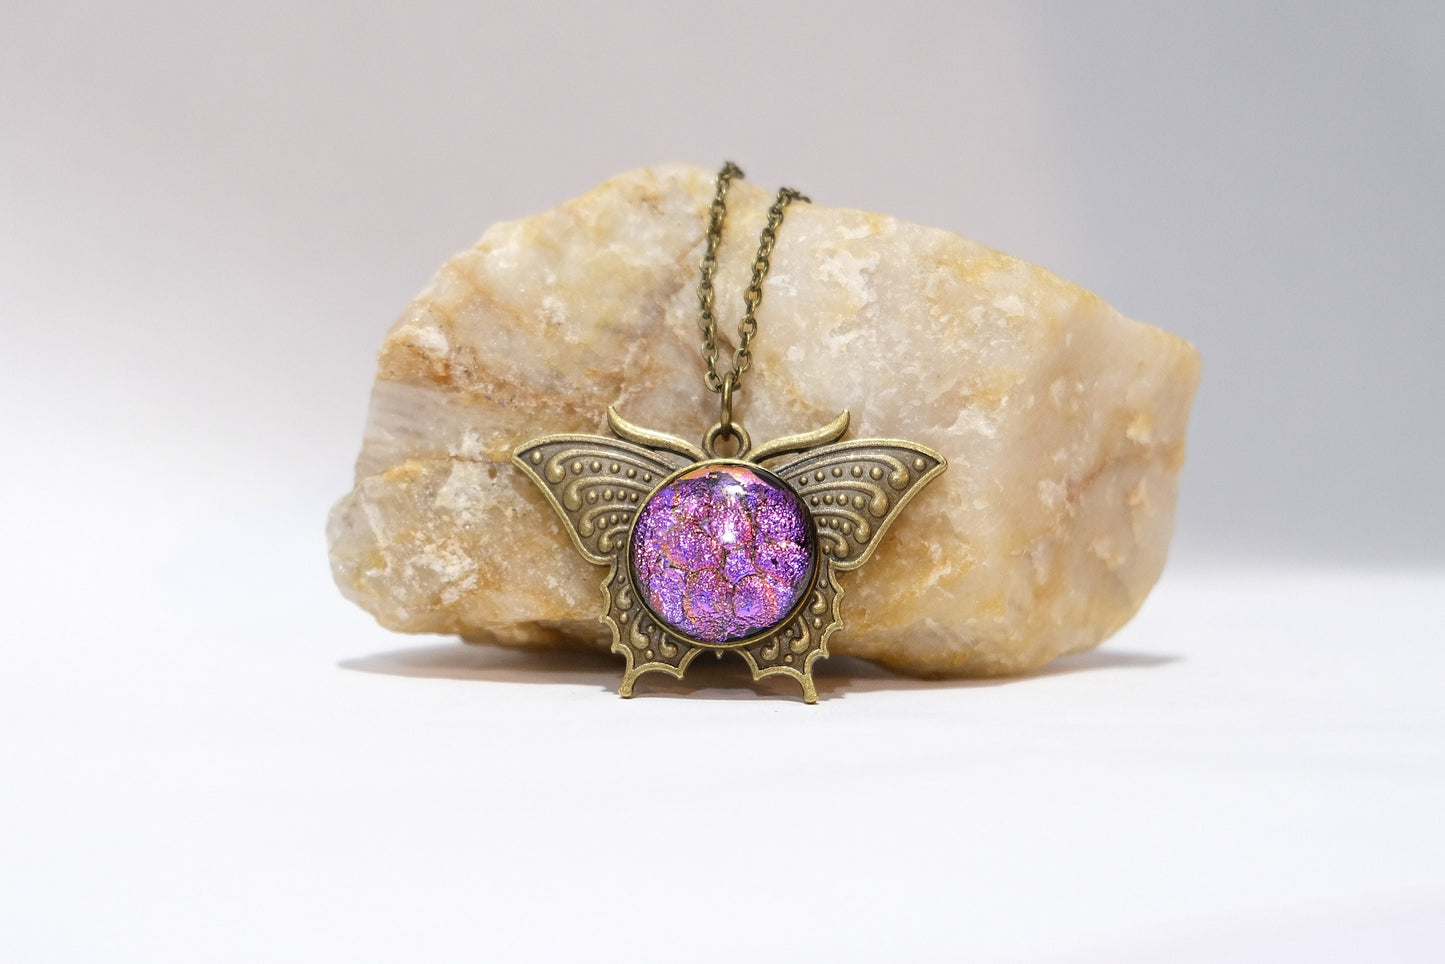 Butterfly pendant necklace, brass tone with dark purple dichroic fused glass center stone on a 20 inch brass tone chain